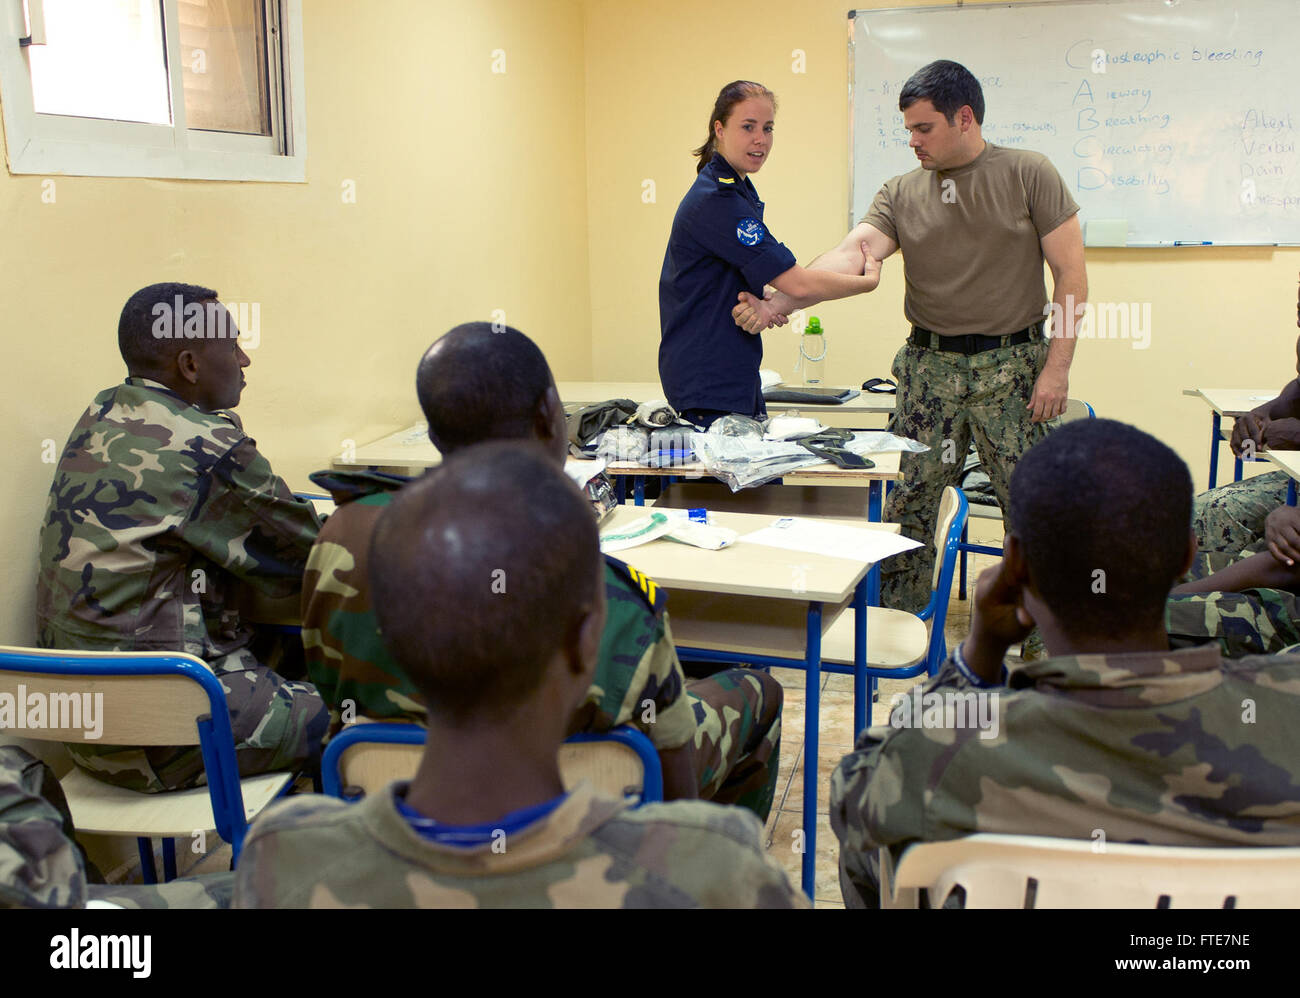 DJIBOUTI, Djibouti (Nov. 13, 2013) - Dutch Royal Navy Cpl. Kim Schild demonstrates methods to control bleeding to Djiboutian, Sudanese and Rwandan military members during Exercise Cutlass Express 2013 at the Port of Djibouti. Exercise Cutlass Express 2013 is a U.S.-facilitated, European-supported multinational maritime exercise in the waters off East Africa designed to improve cooperation, tactical expertise and information sharing practices among East Africa maritime forces to increase maritime safety and security in the region. (U.S. Air Force photo by Staff Sgt. Chad Warren) Stock Photo